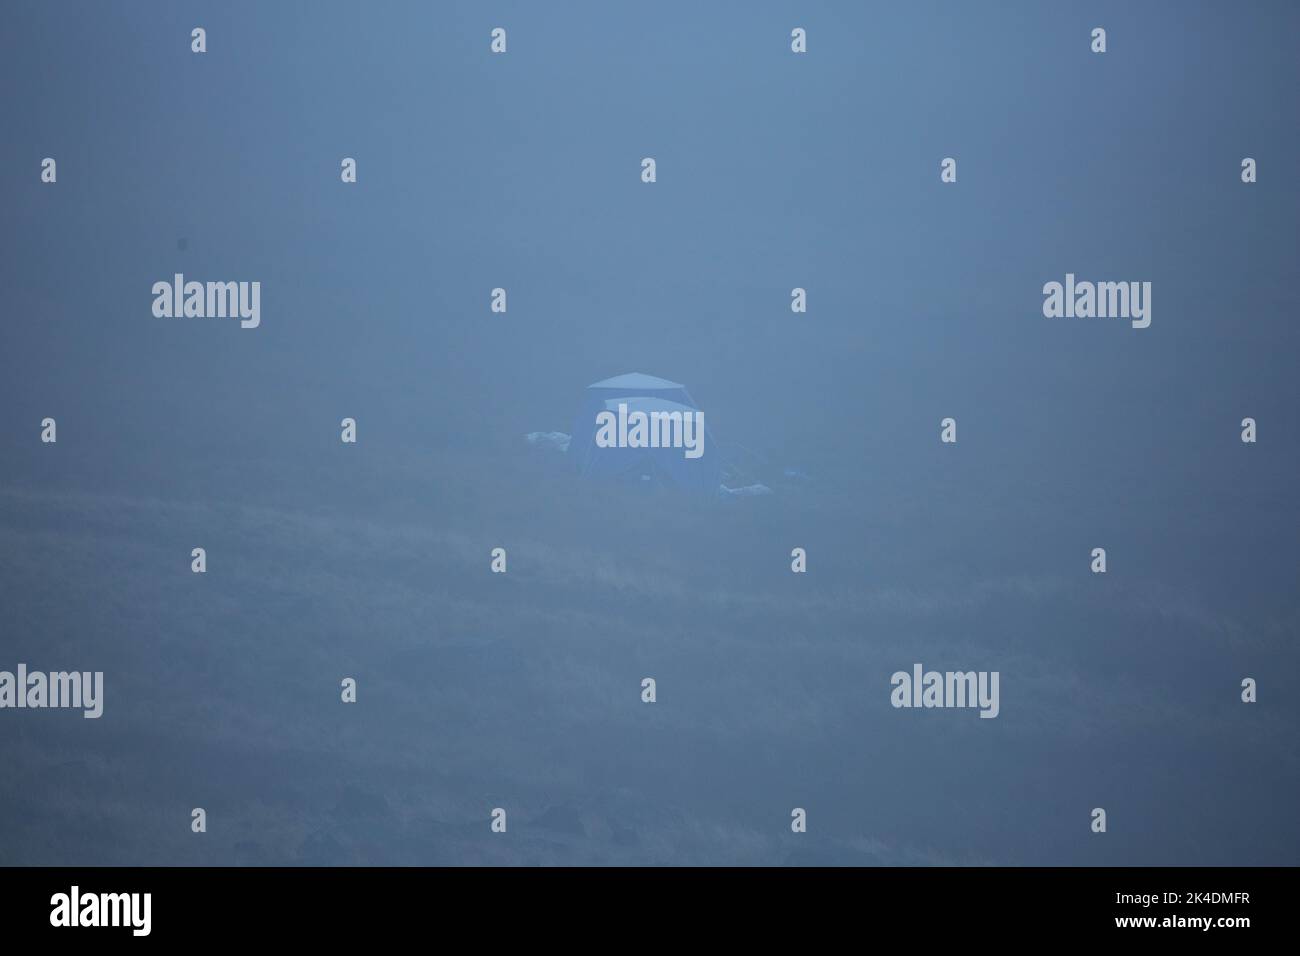 Saddleworth, Oldham, UK. 2nd October, 2022. Police continue to search for human remains on Saddleworth Moor in relation to the Moors Murders. Peter Liggins/Alamy Live News Stock Photo